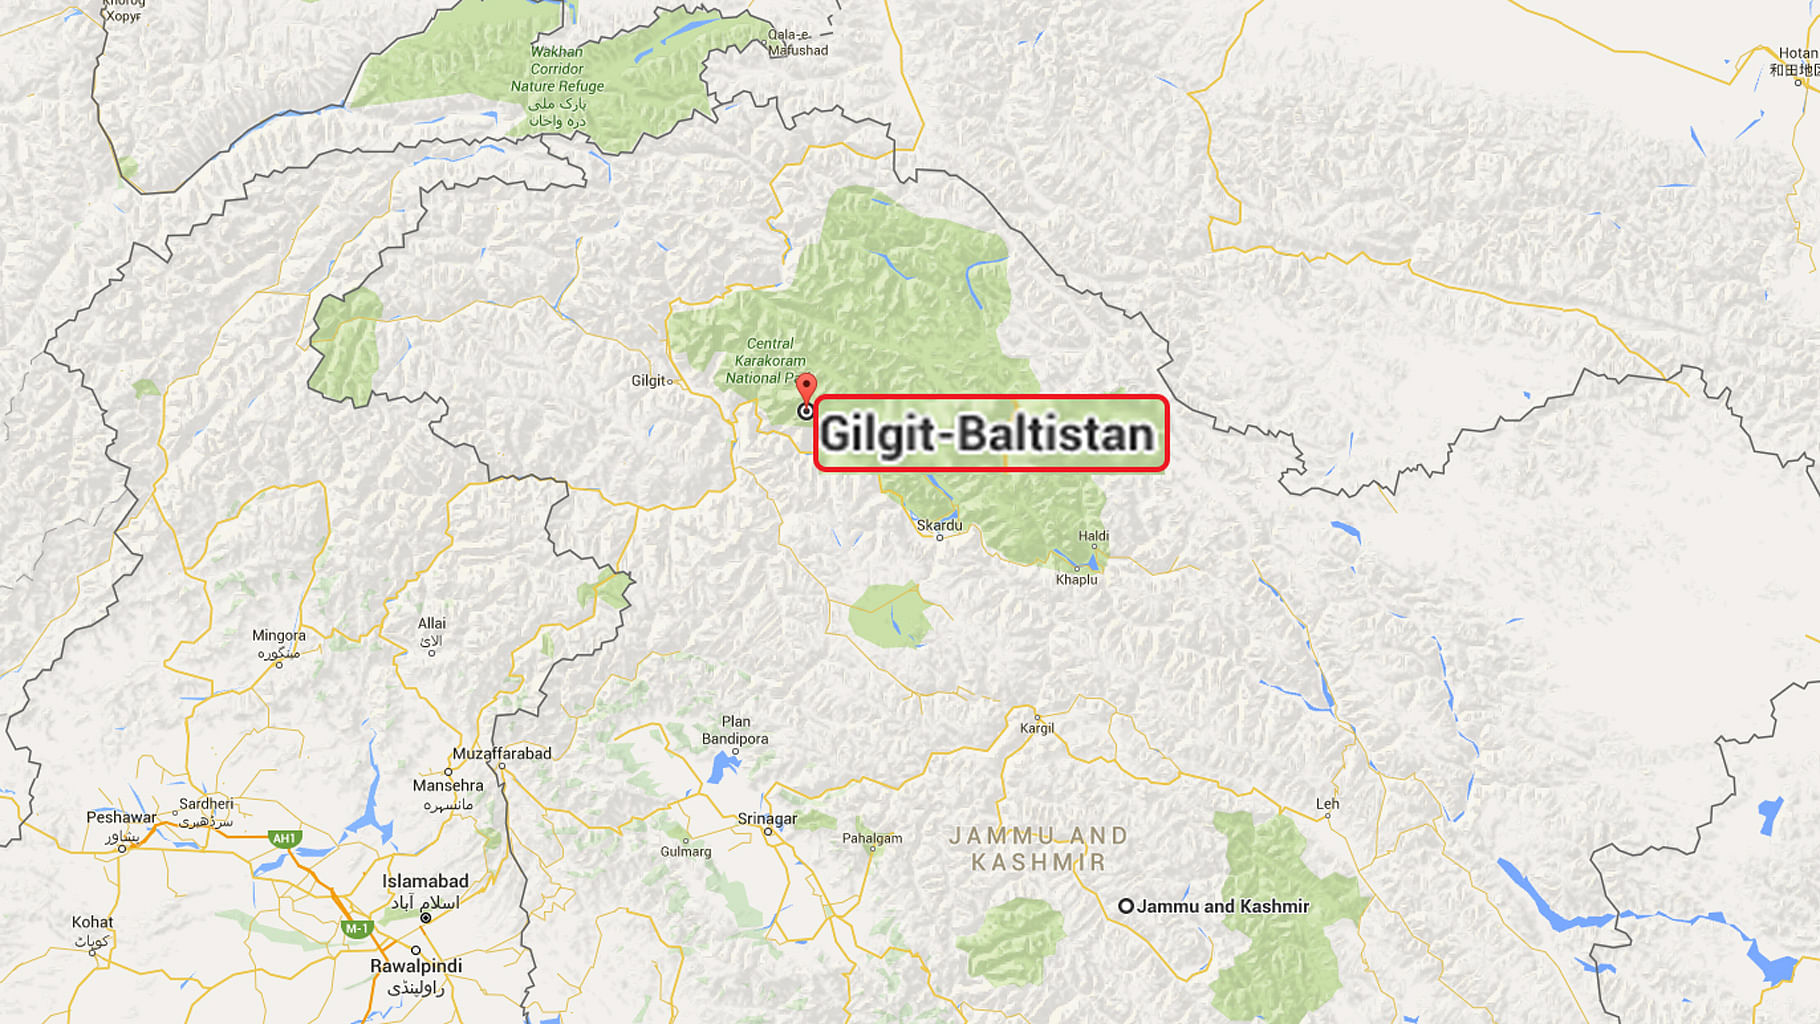 Gilgit Local Desi Xxx - In Pakistan Occupied Kashmir, Rape of Women by Both Terrorists and Soldiers  and 'Jihad' Encourages Sexual Slavery | OPINION